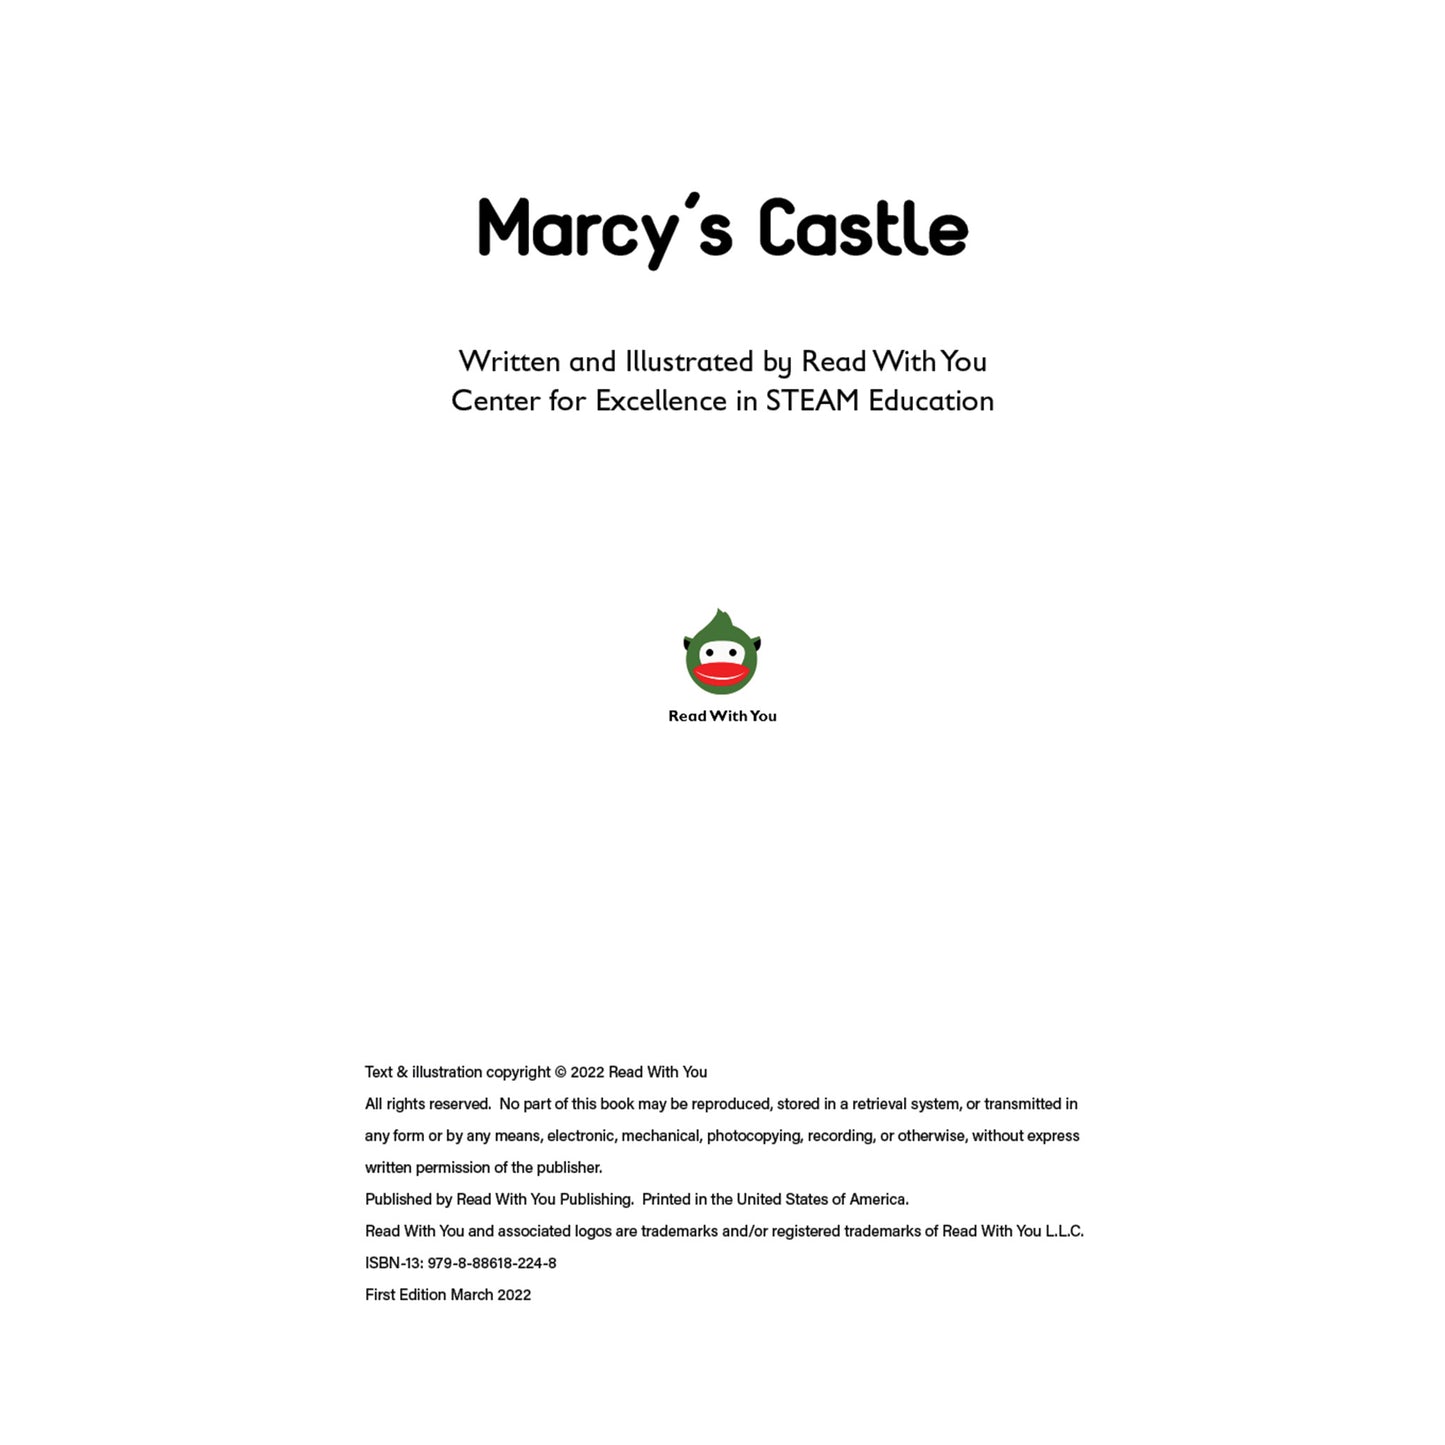 Marcy's Castle